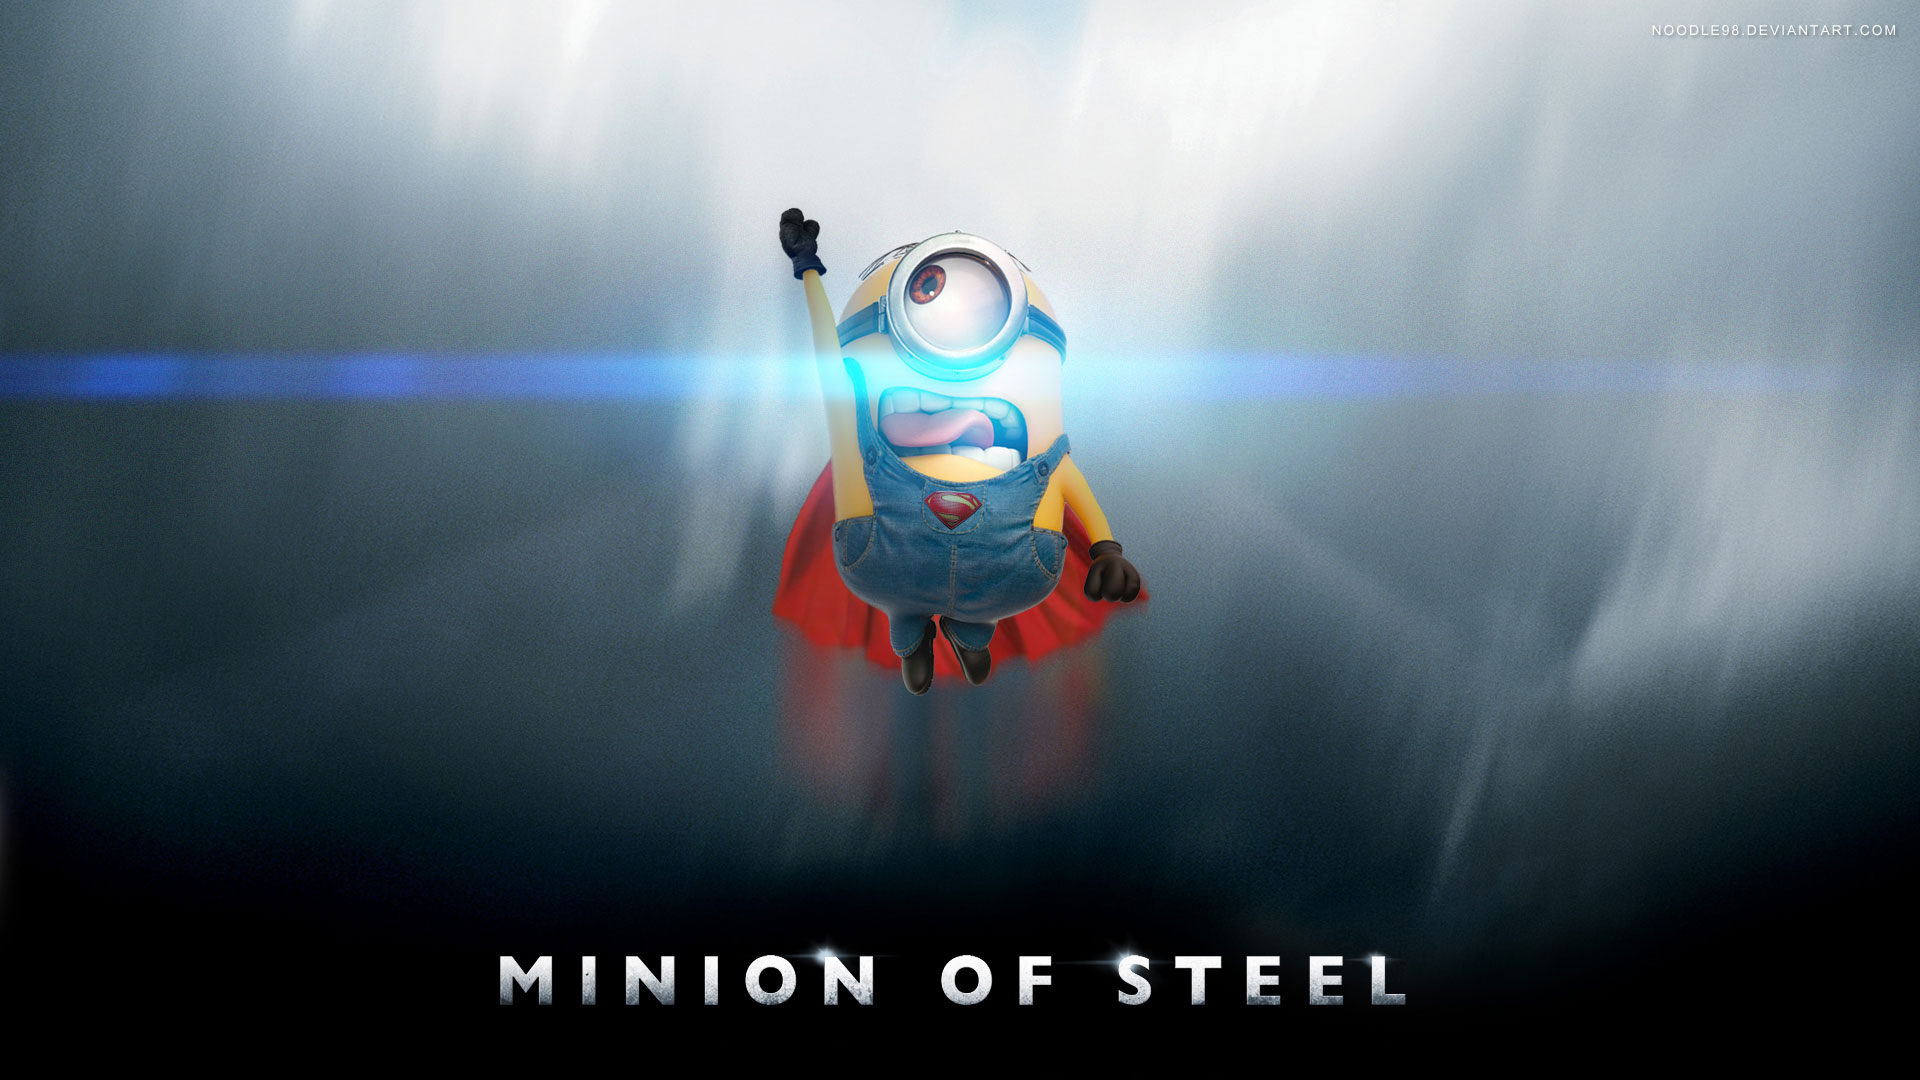   minion man of steel despicable me 2 wallpapers desktop backgrounds